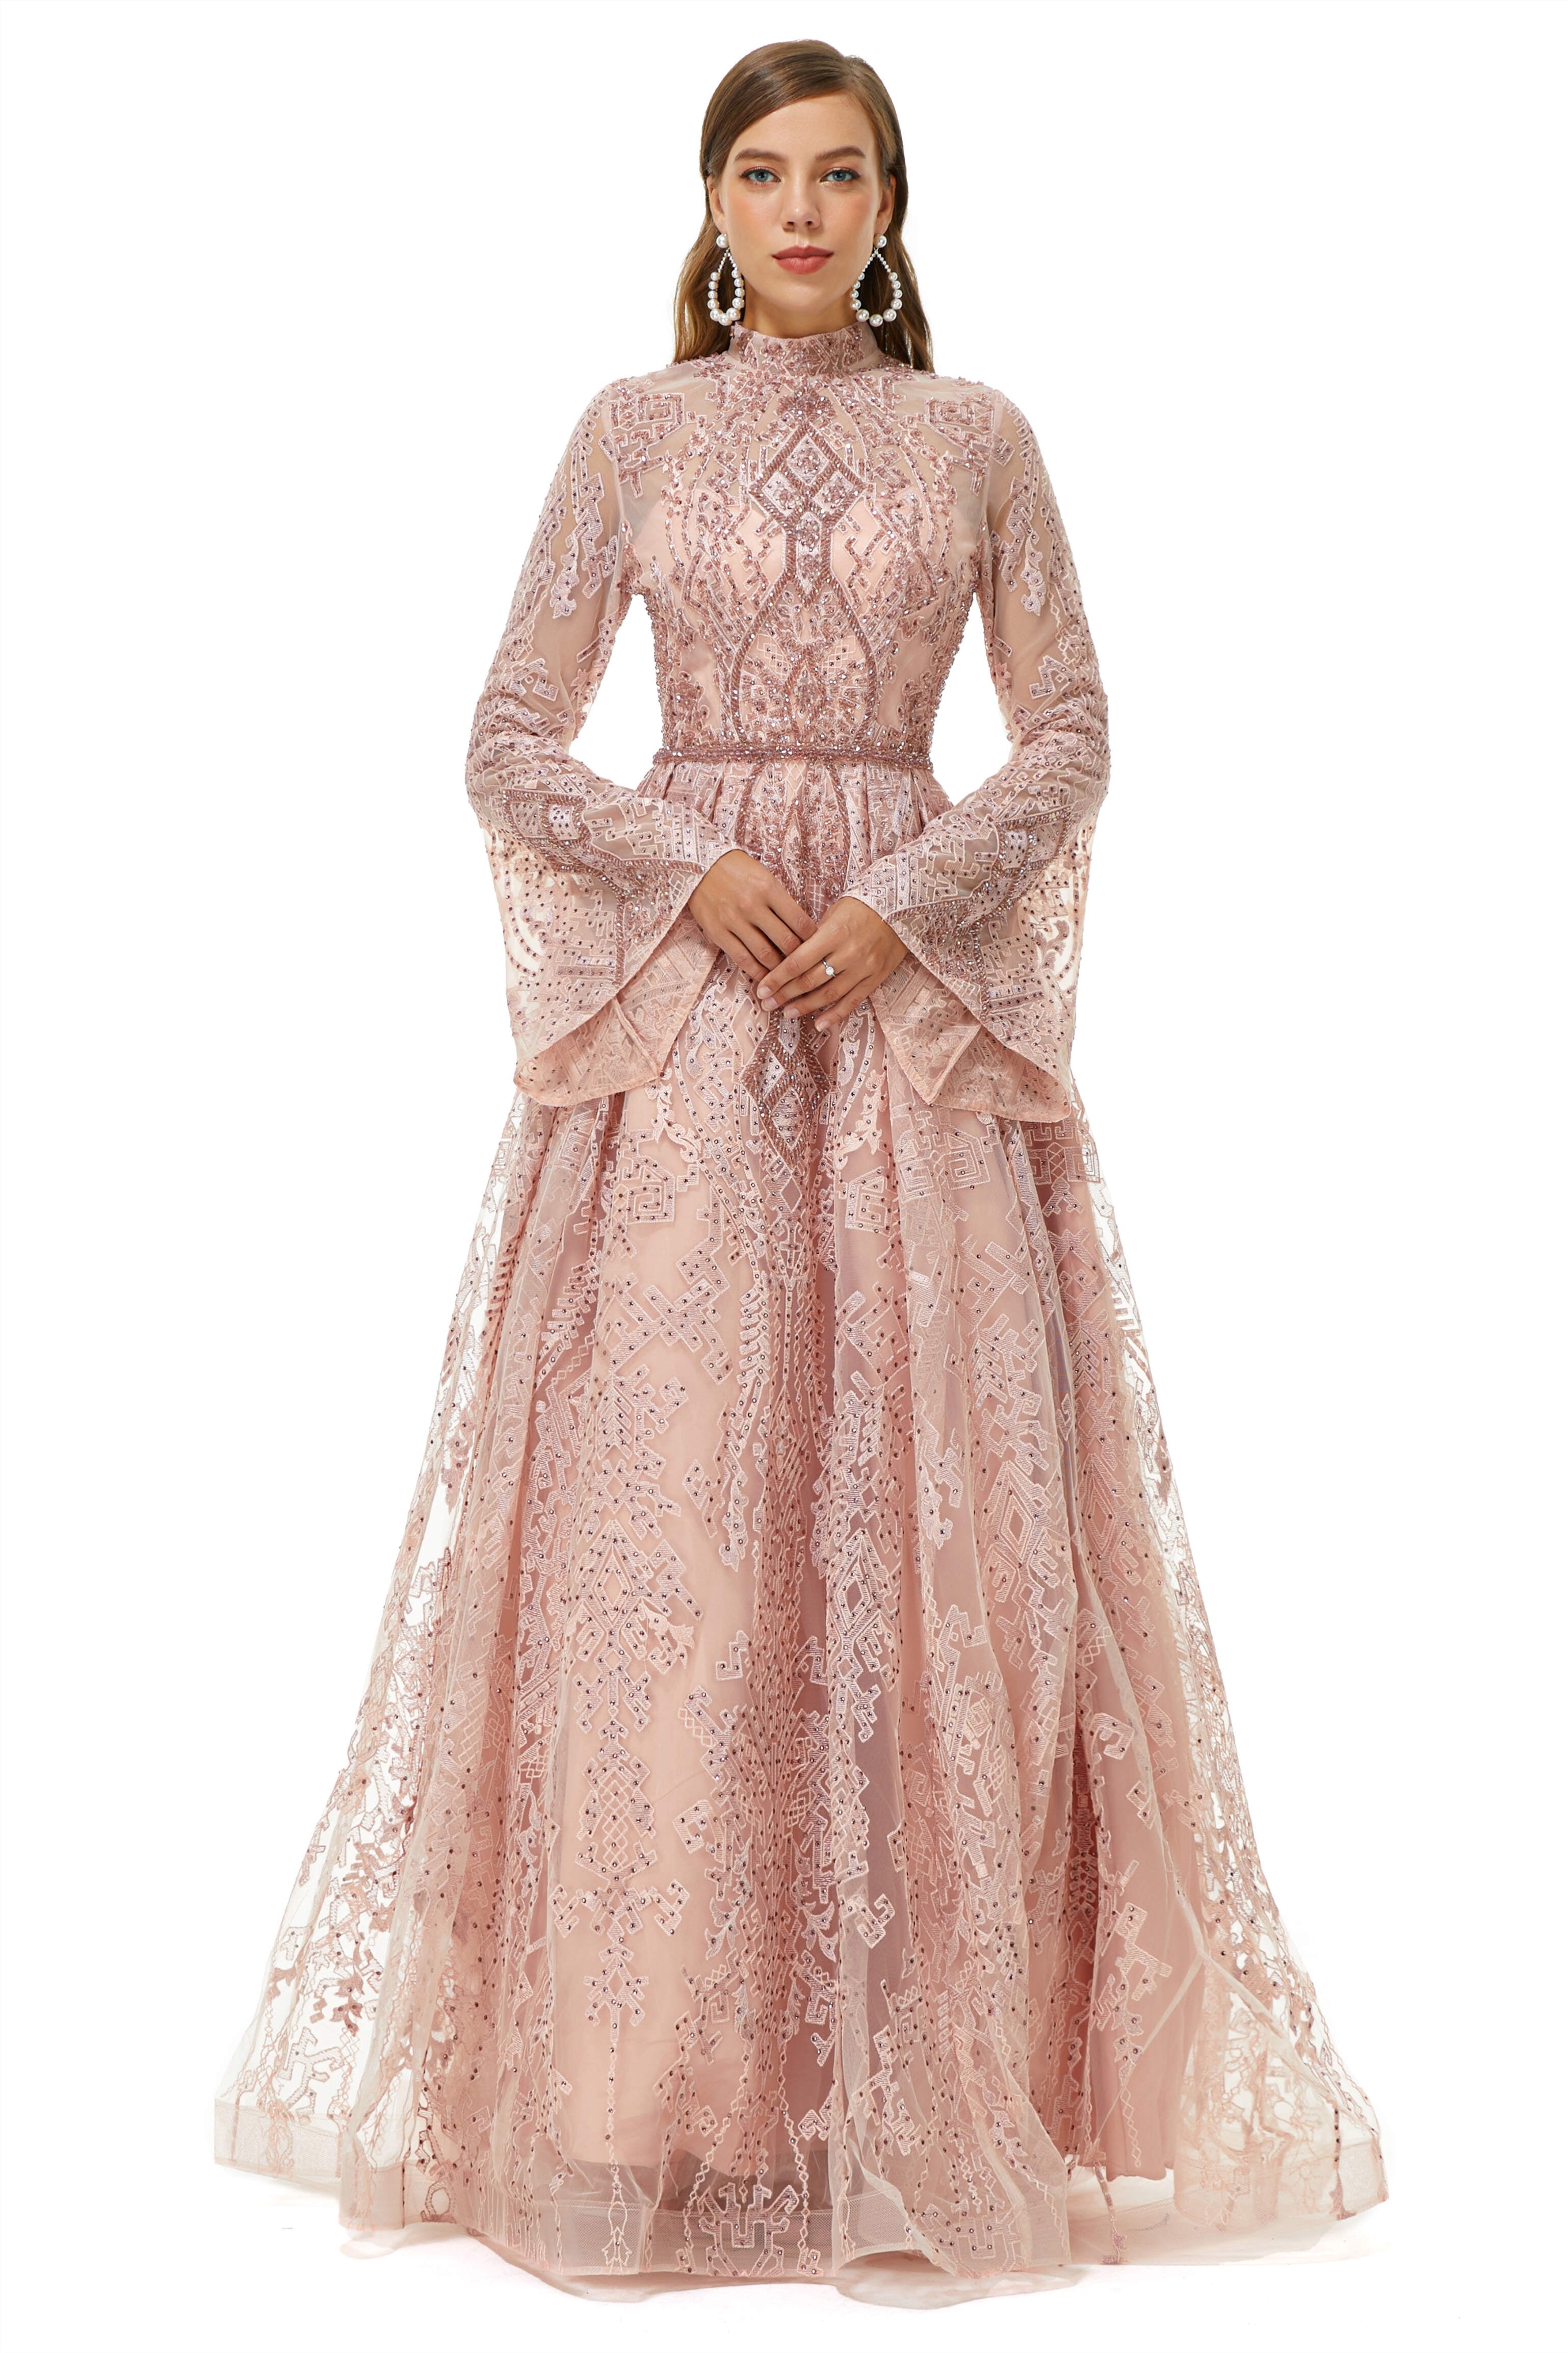 Pink Tulle Appliques High Neck Long Sleeve Beading Corset Prom Dresses outfit, Dressy Outfit